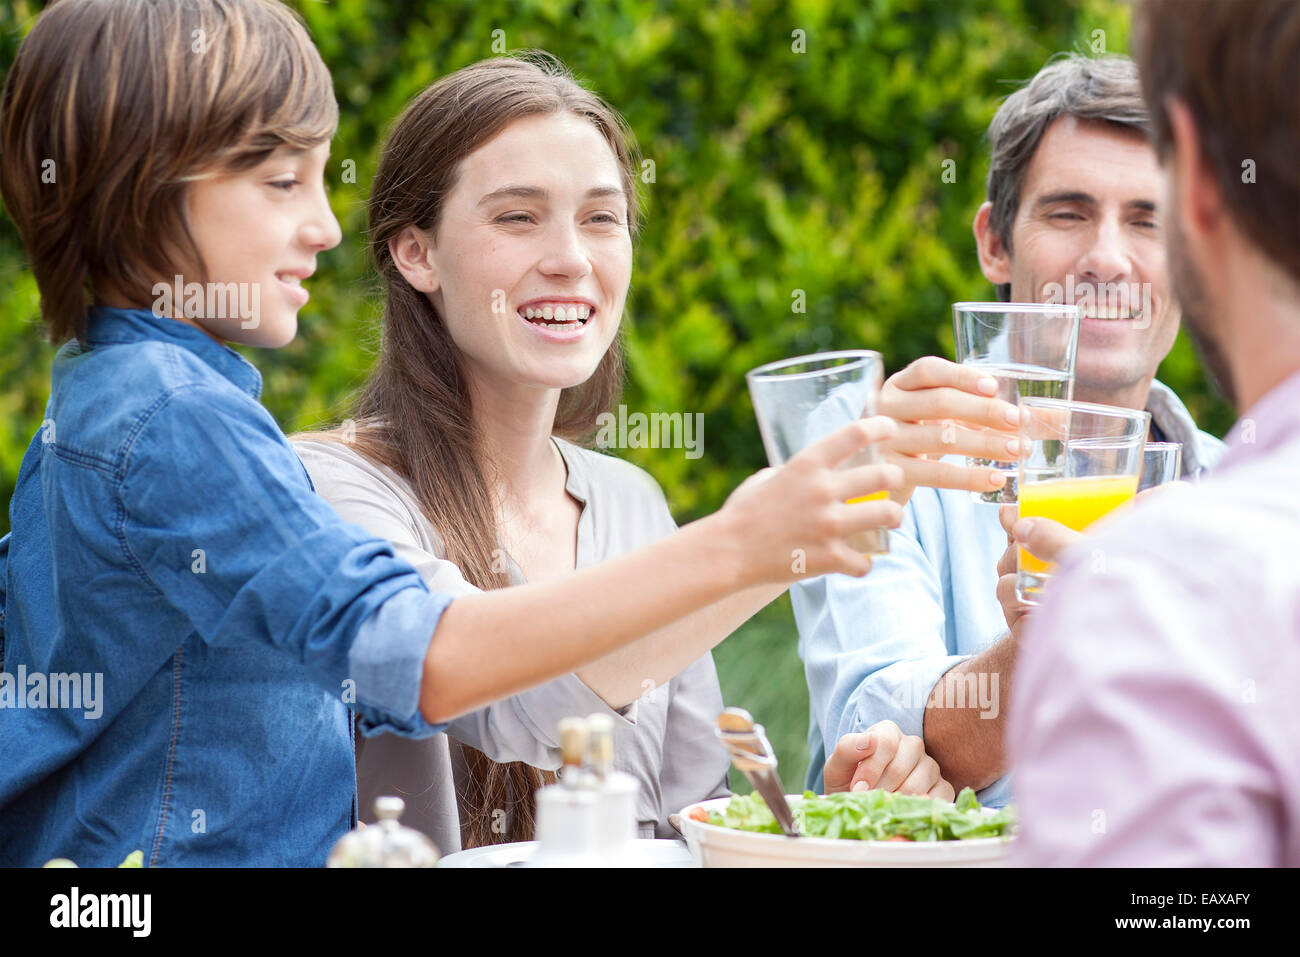 Family clinking glasses at outdoor gathering Stock Photo